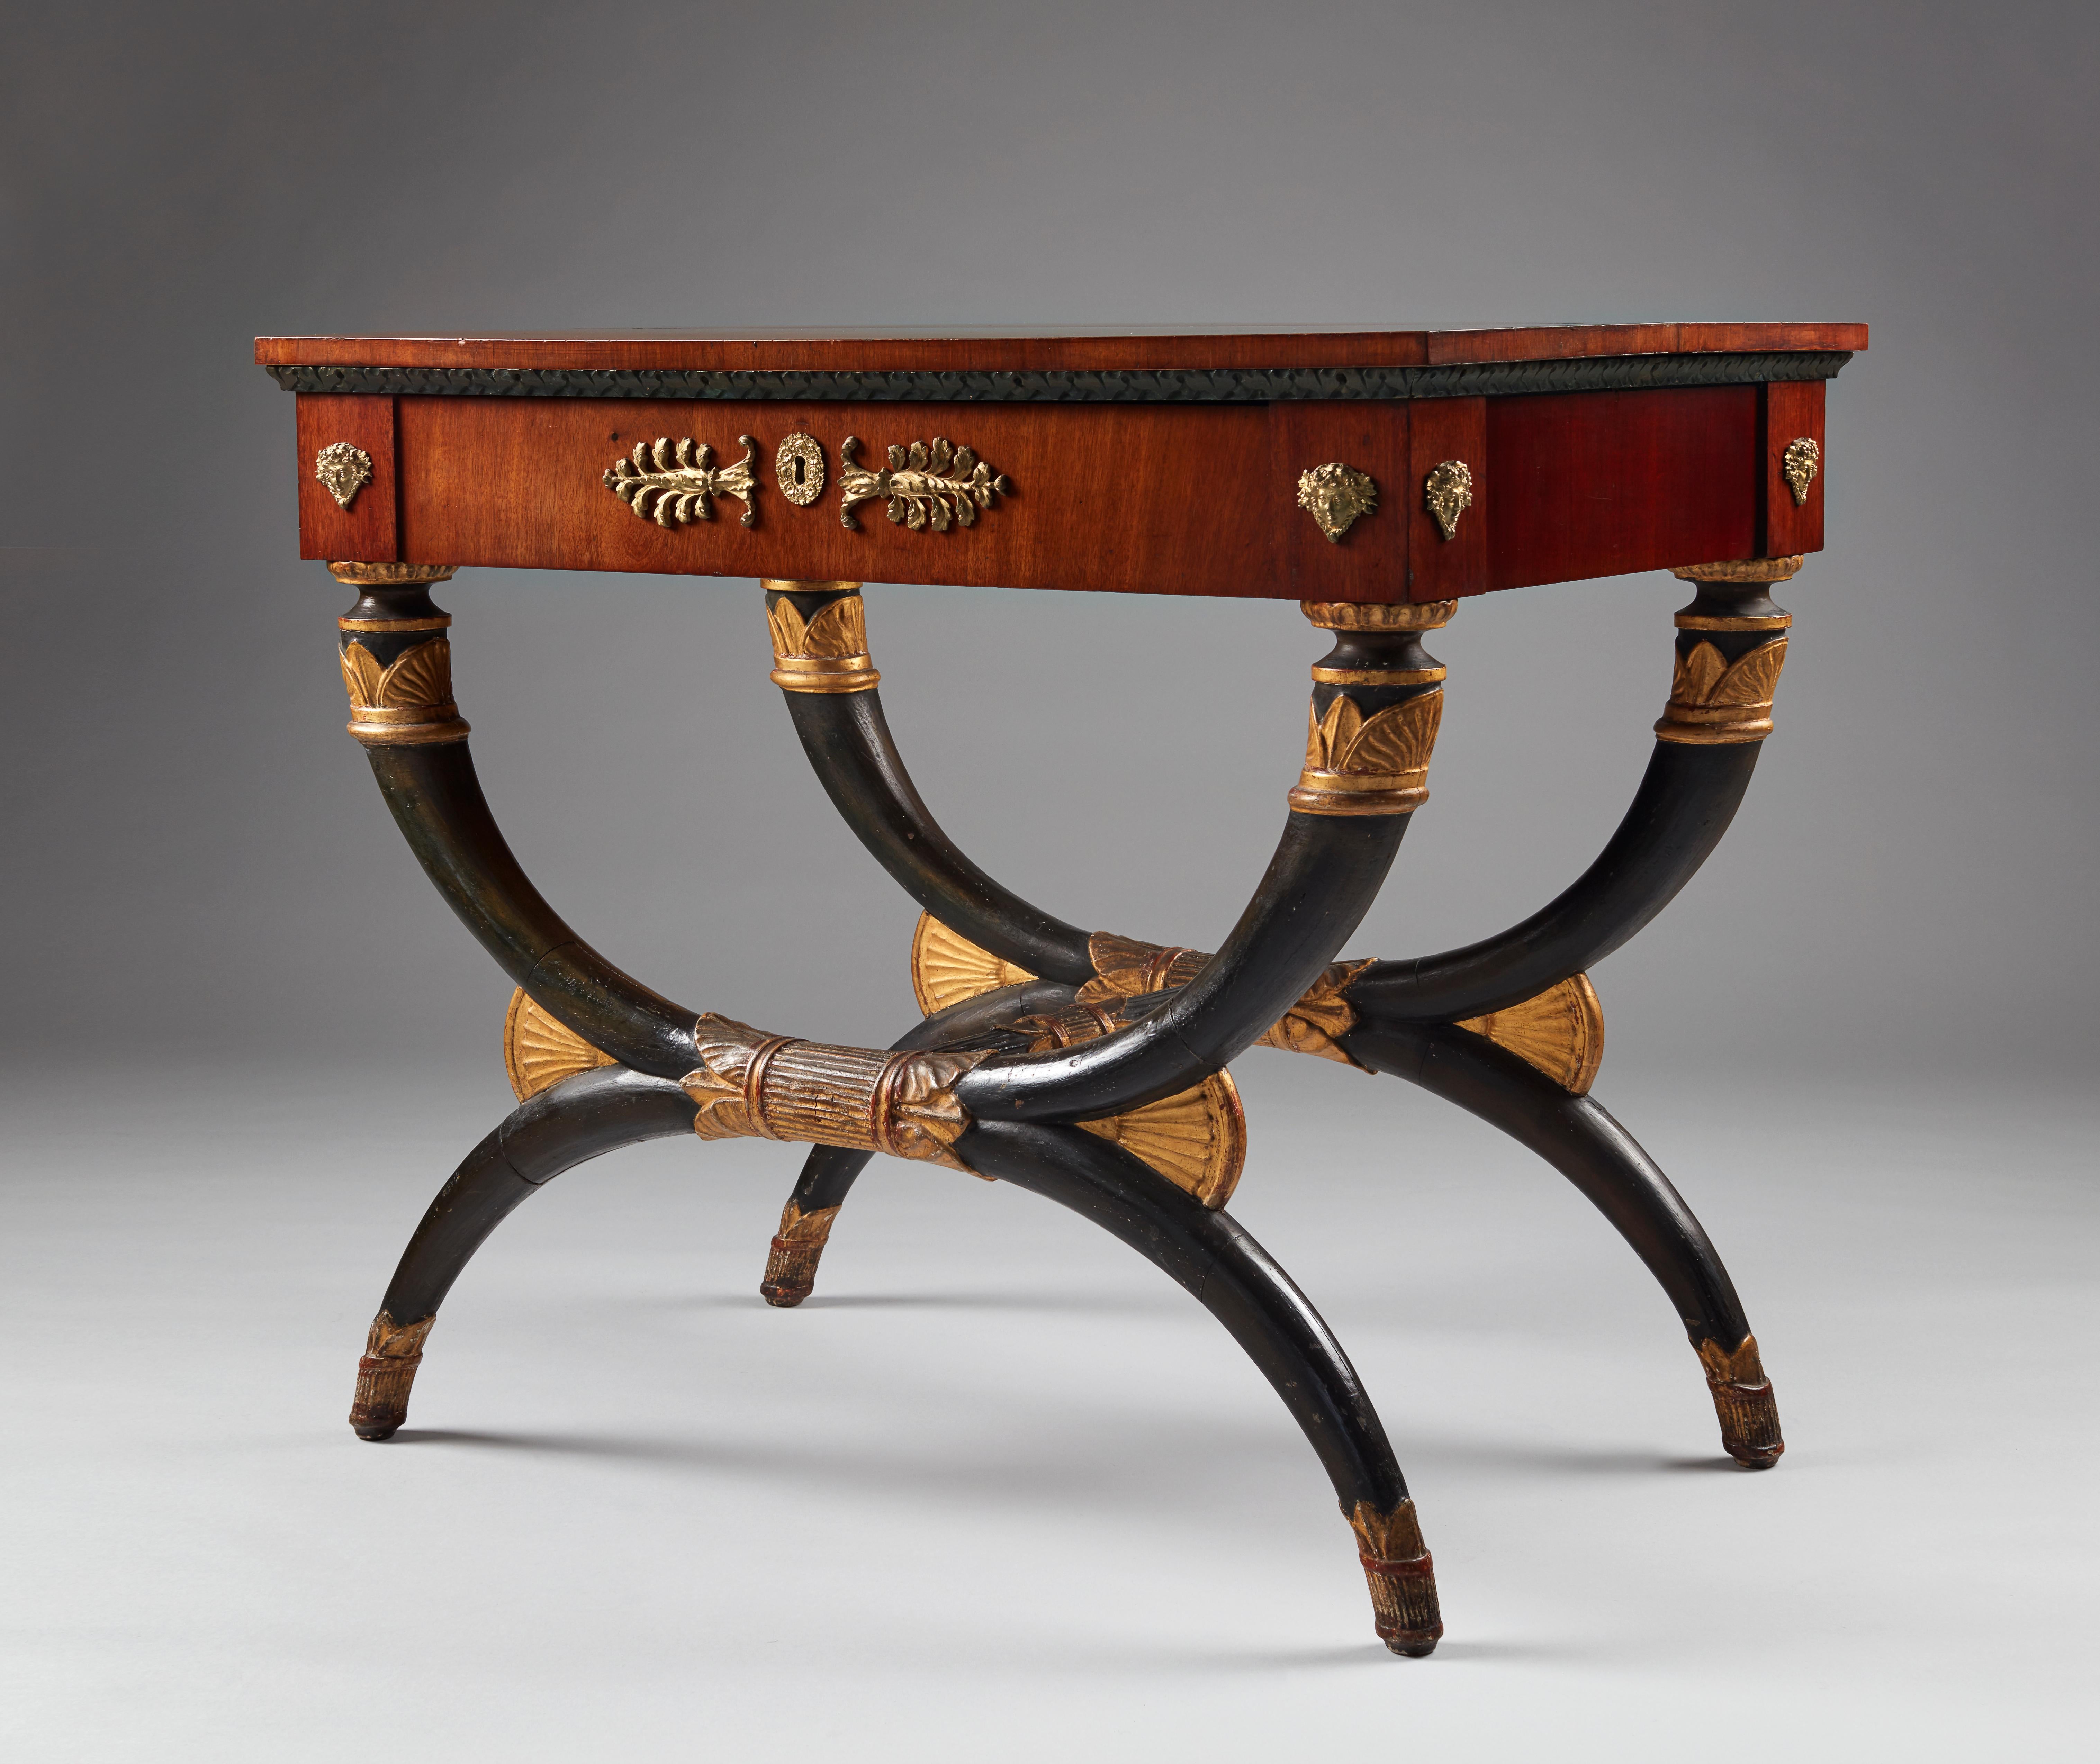 An early 19th century German (Saxony) Empire painted and parcel gilt mahogany console table, which can also be used as a center table. With one central frieze drawer above an X-frame base, that alludes to an ancient form, the Curule seat, which